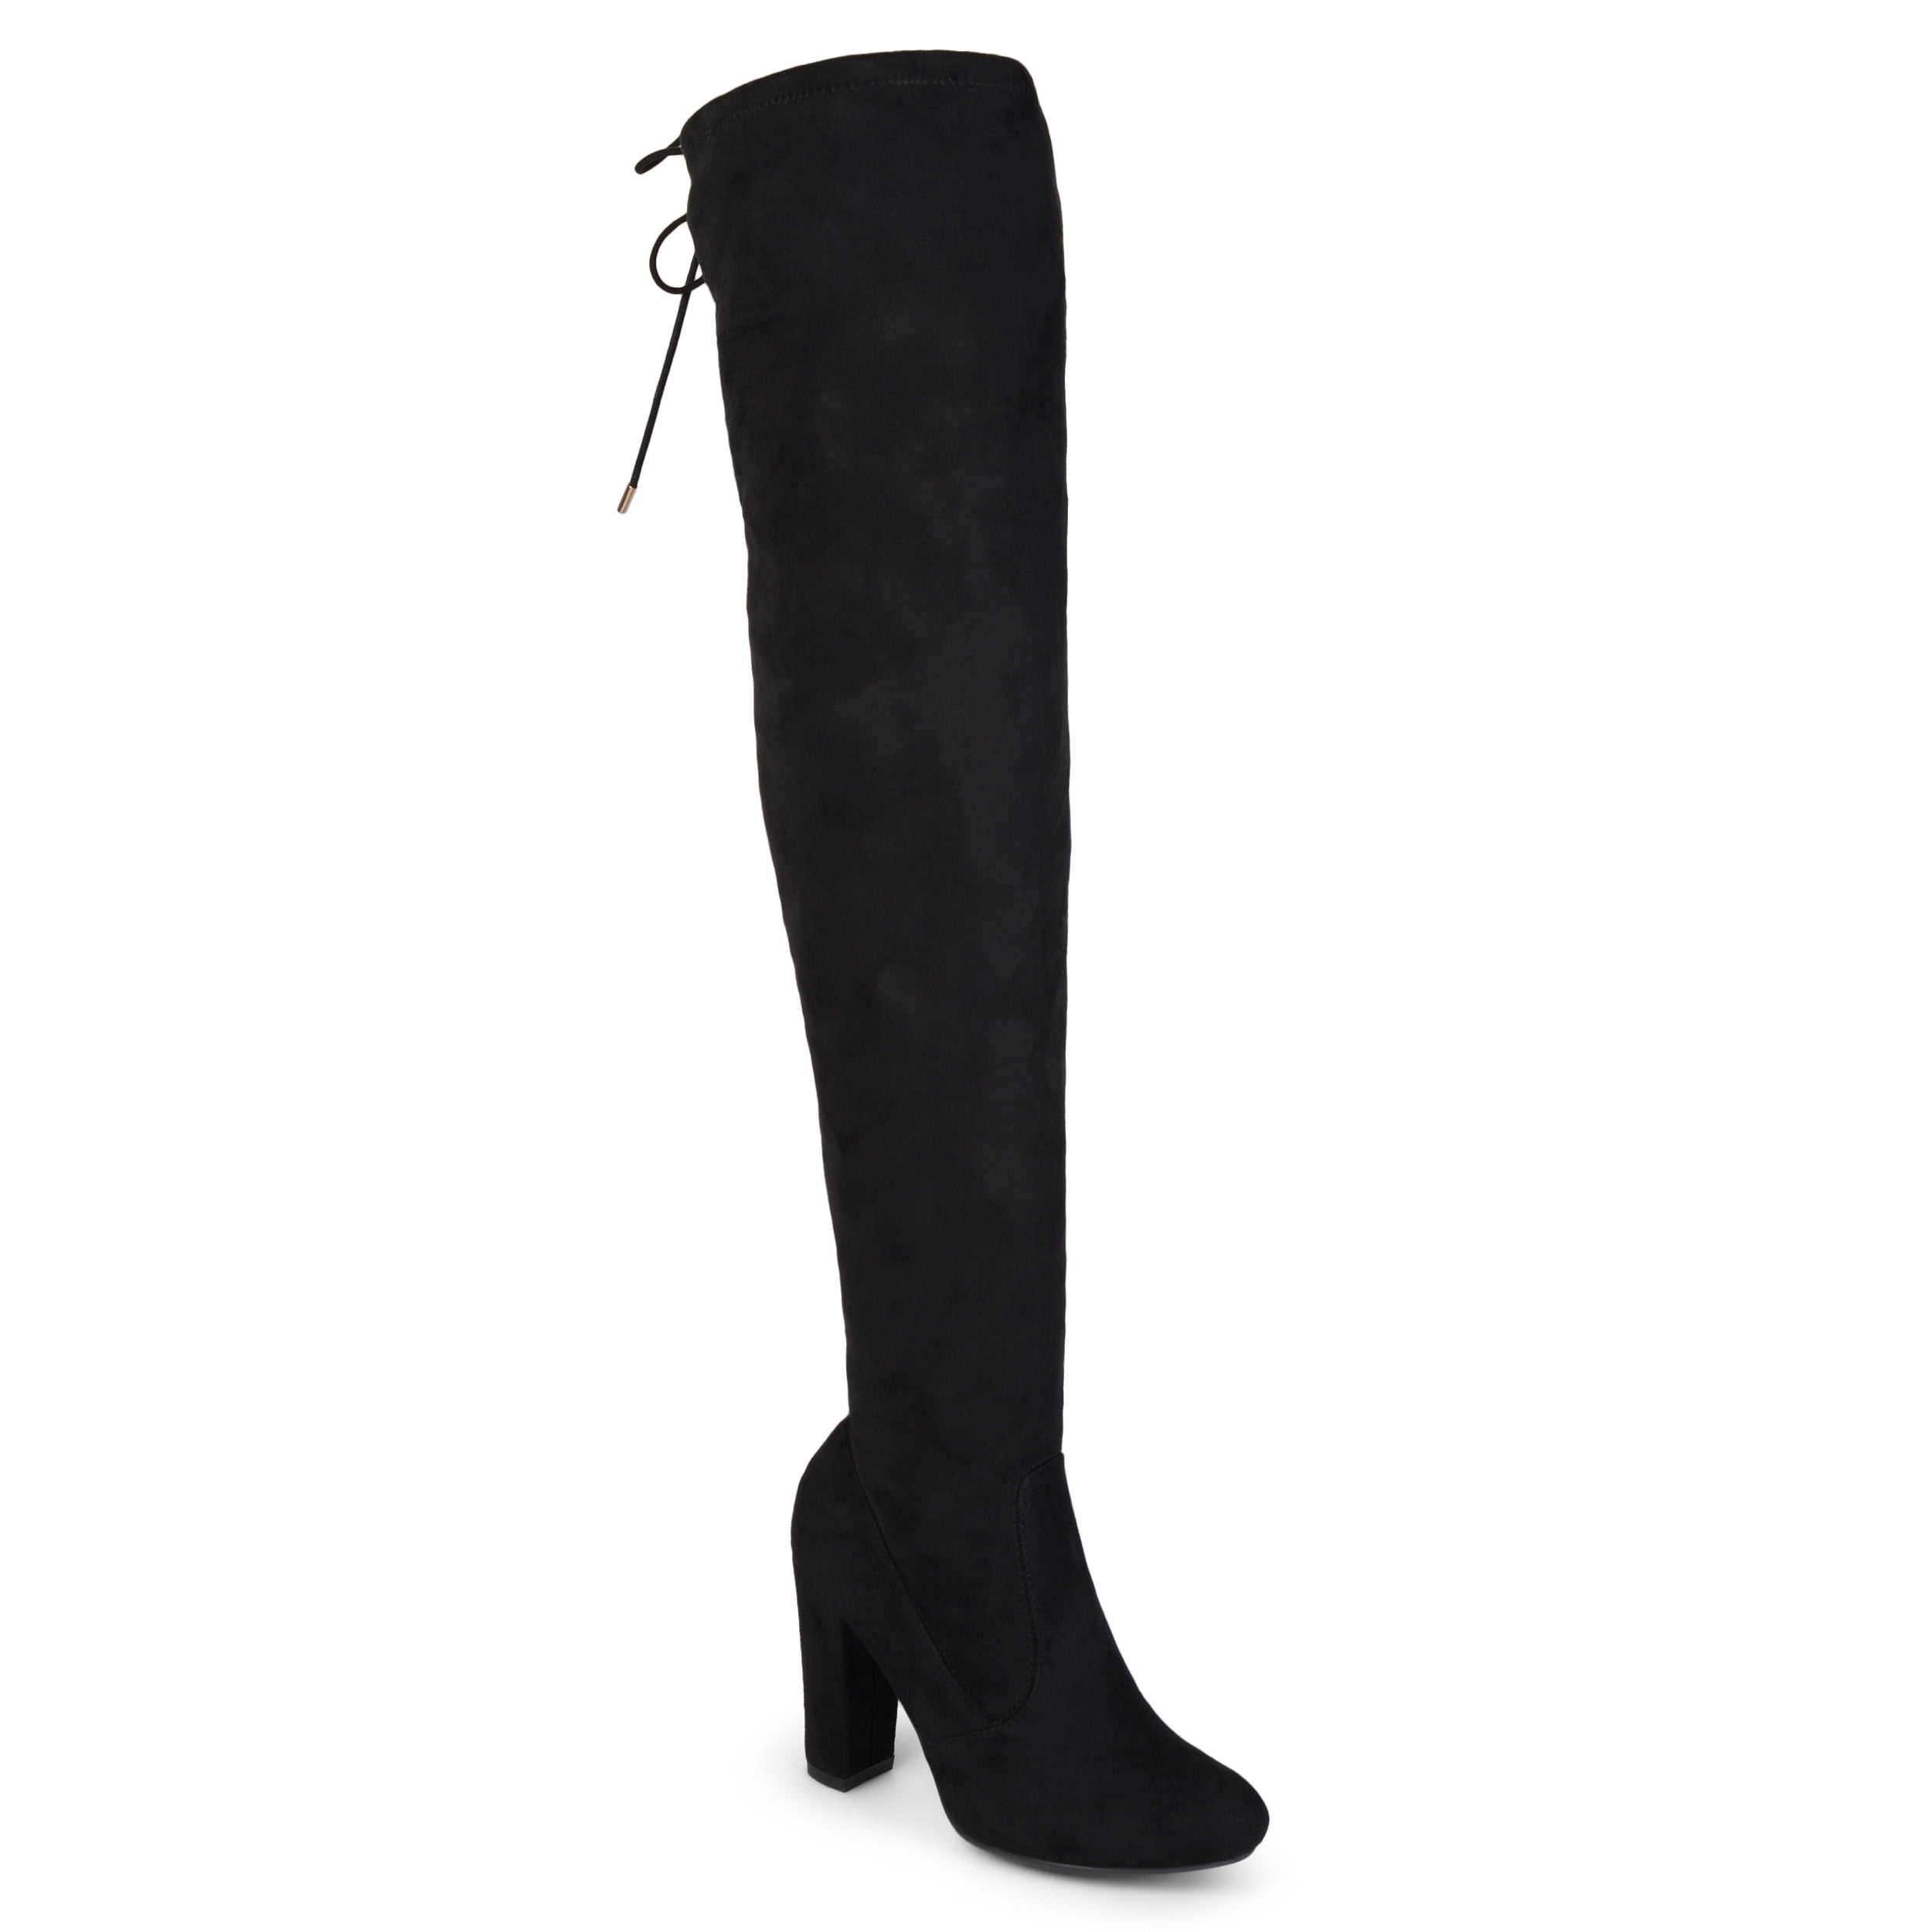 Details about   Mid Calf Boots for Women Cowboy Knight Mid Chunky Heel Comfort Dress High Boots 